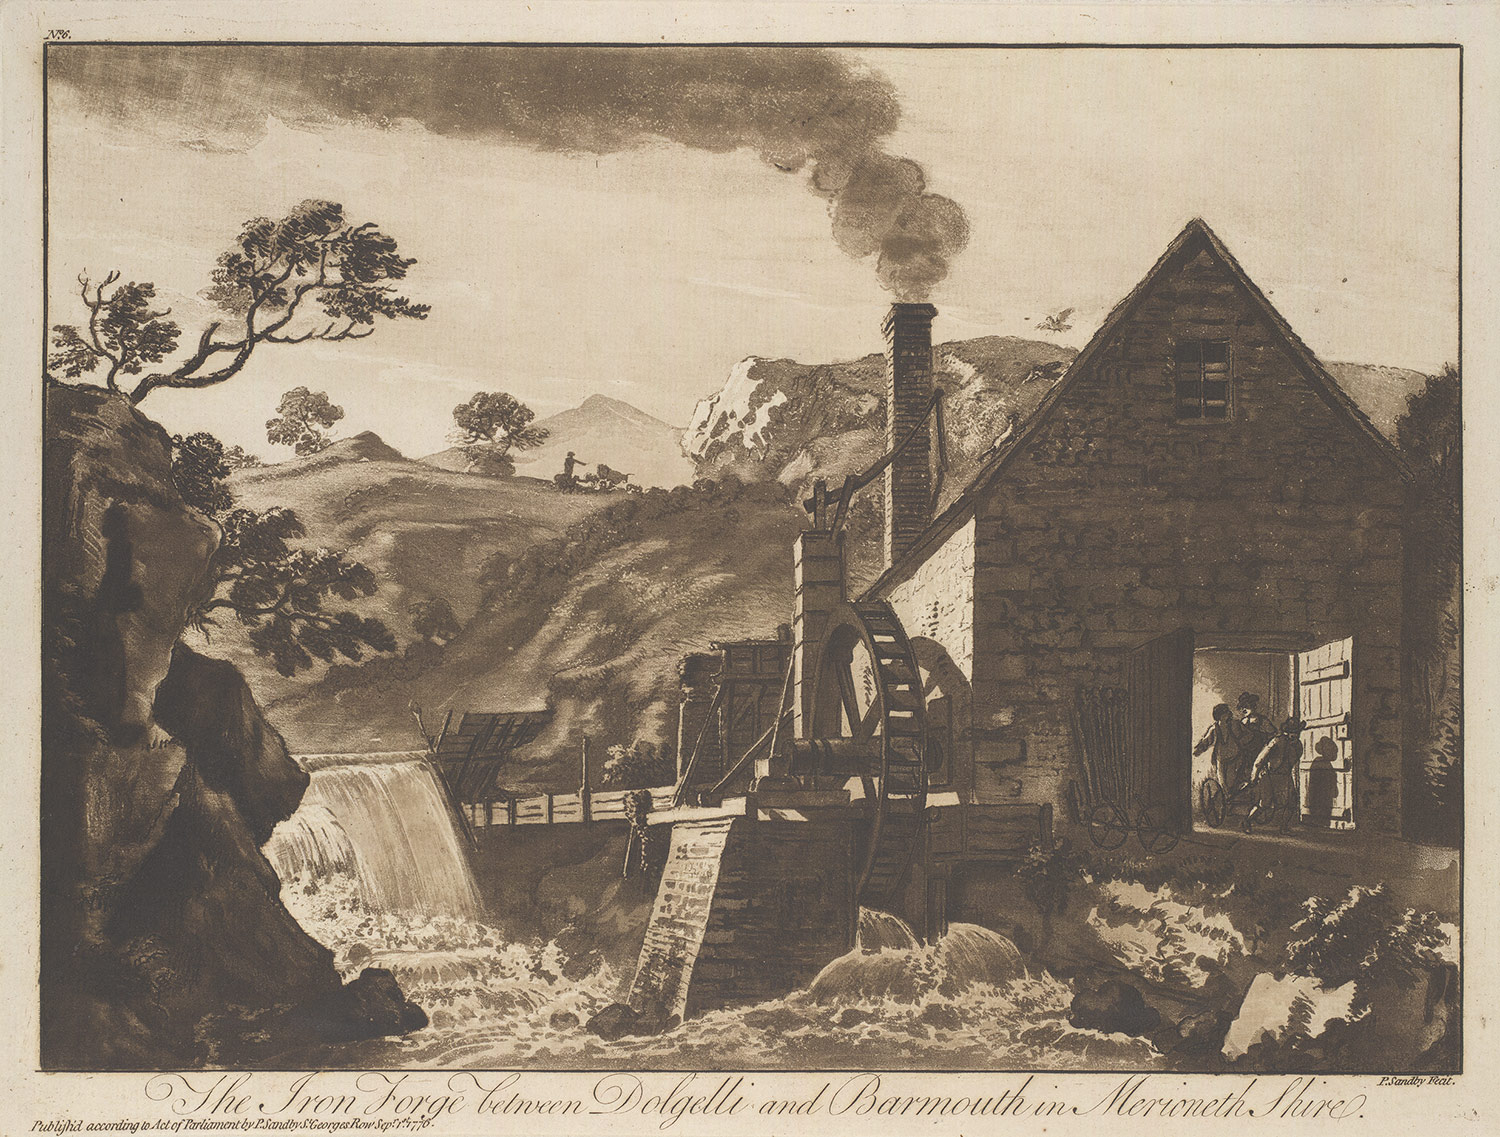 aquatint, The Iron Forge between Dolgelli and Barmouth in Merioneth Shire: Plate 6 of XII Views in North Wales